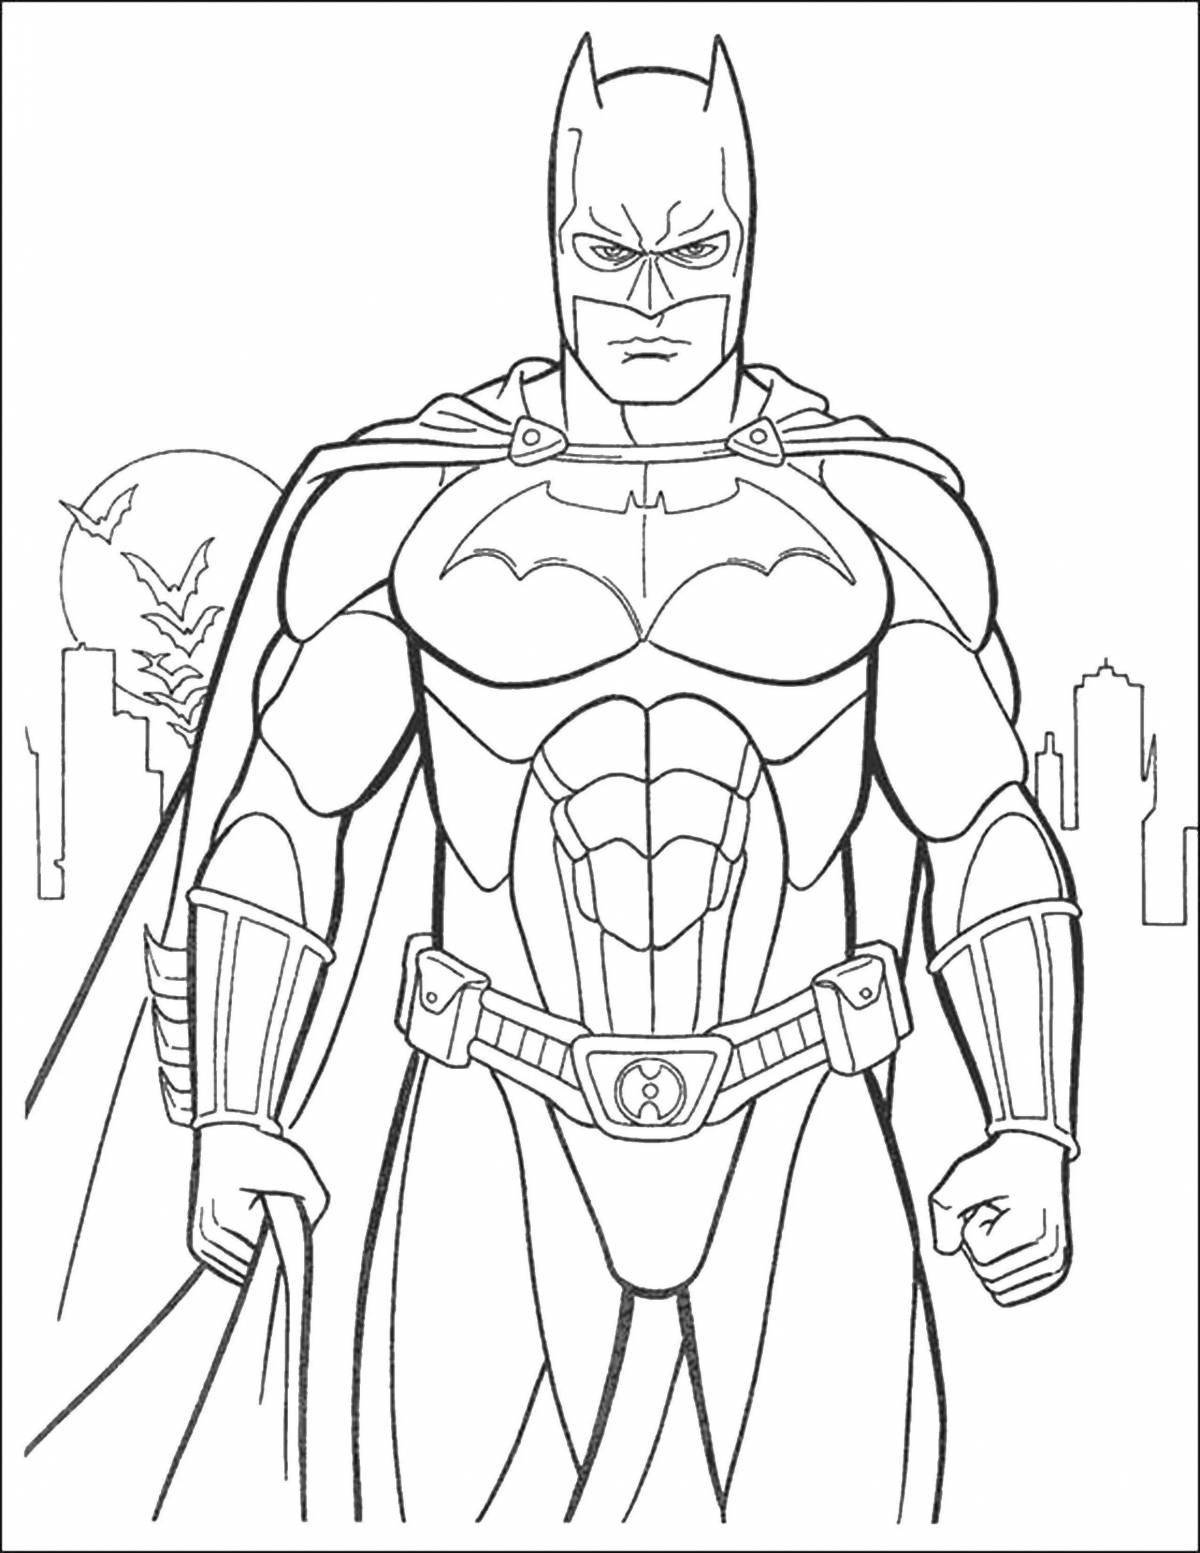 Superhero coloring book for 5 year old boys